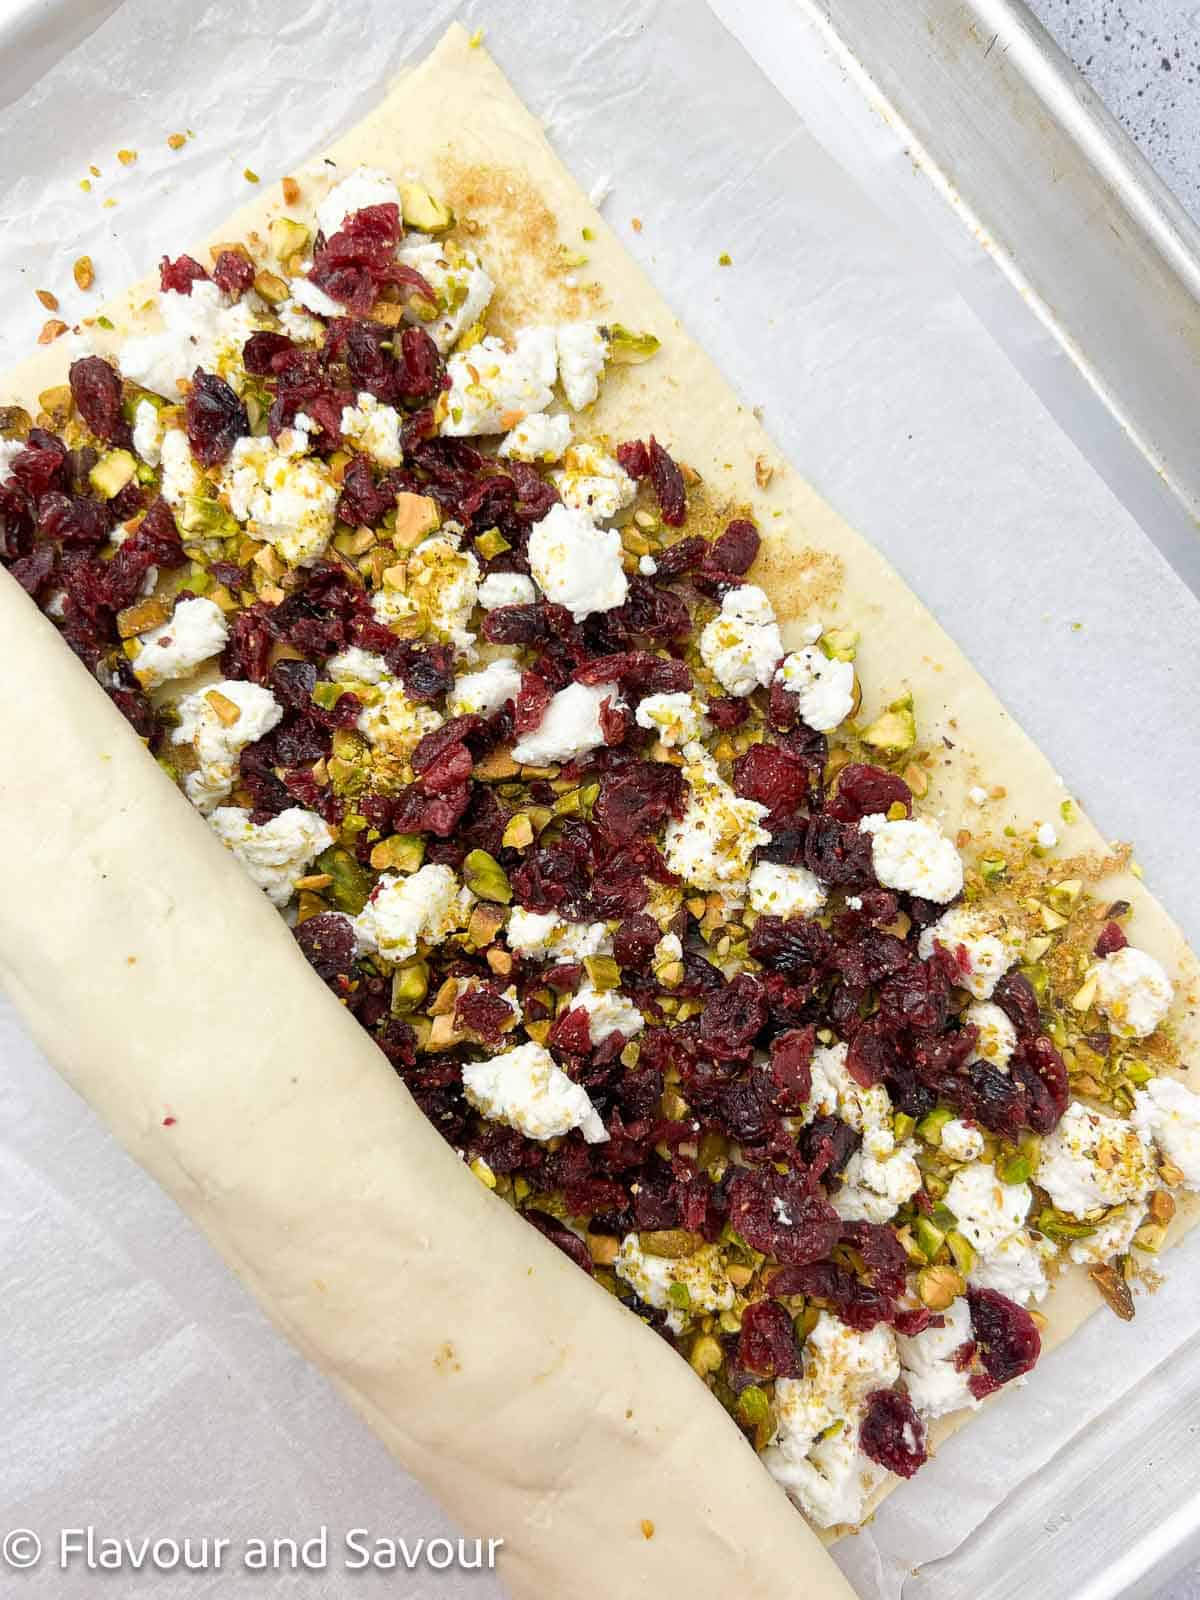 A half rolled log of puff pastry filled with goat cheese, dried cranberries and pistachios.